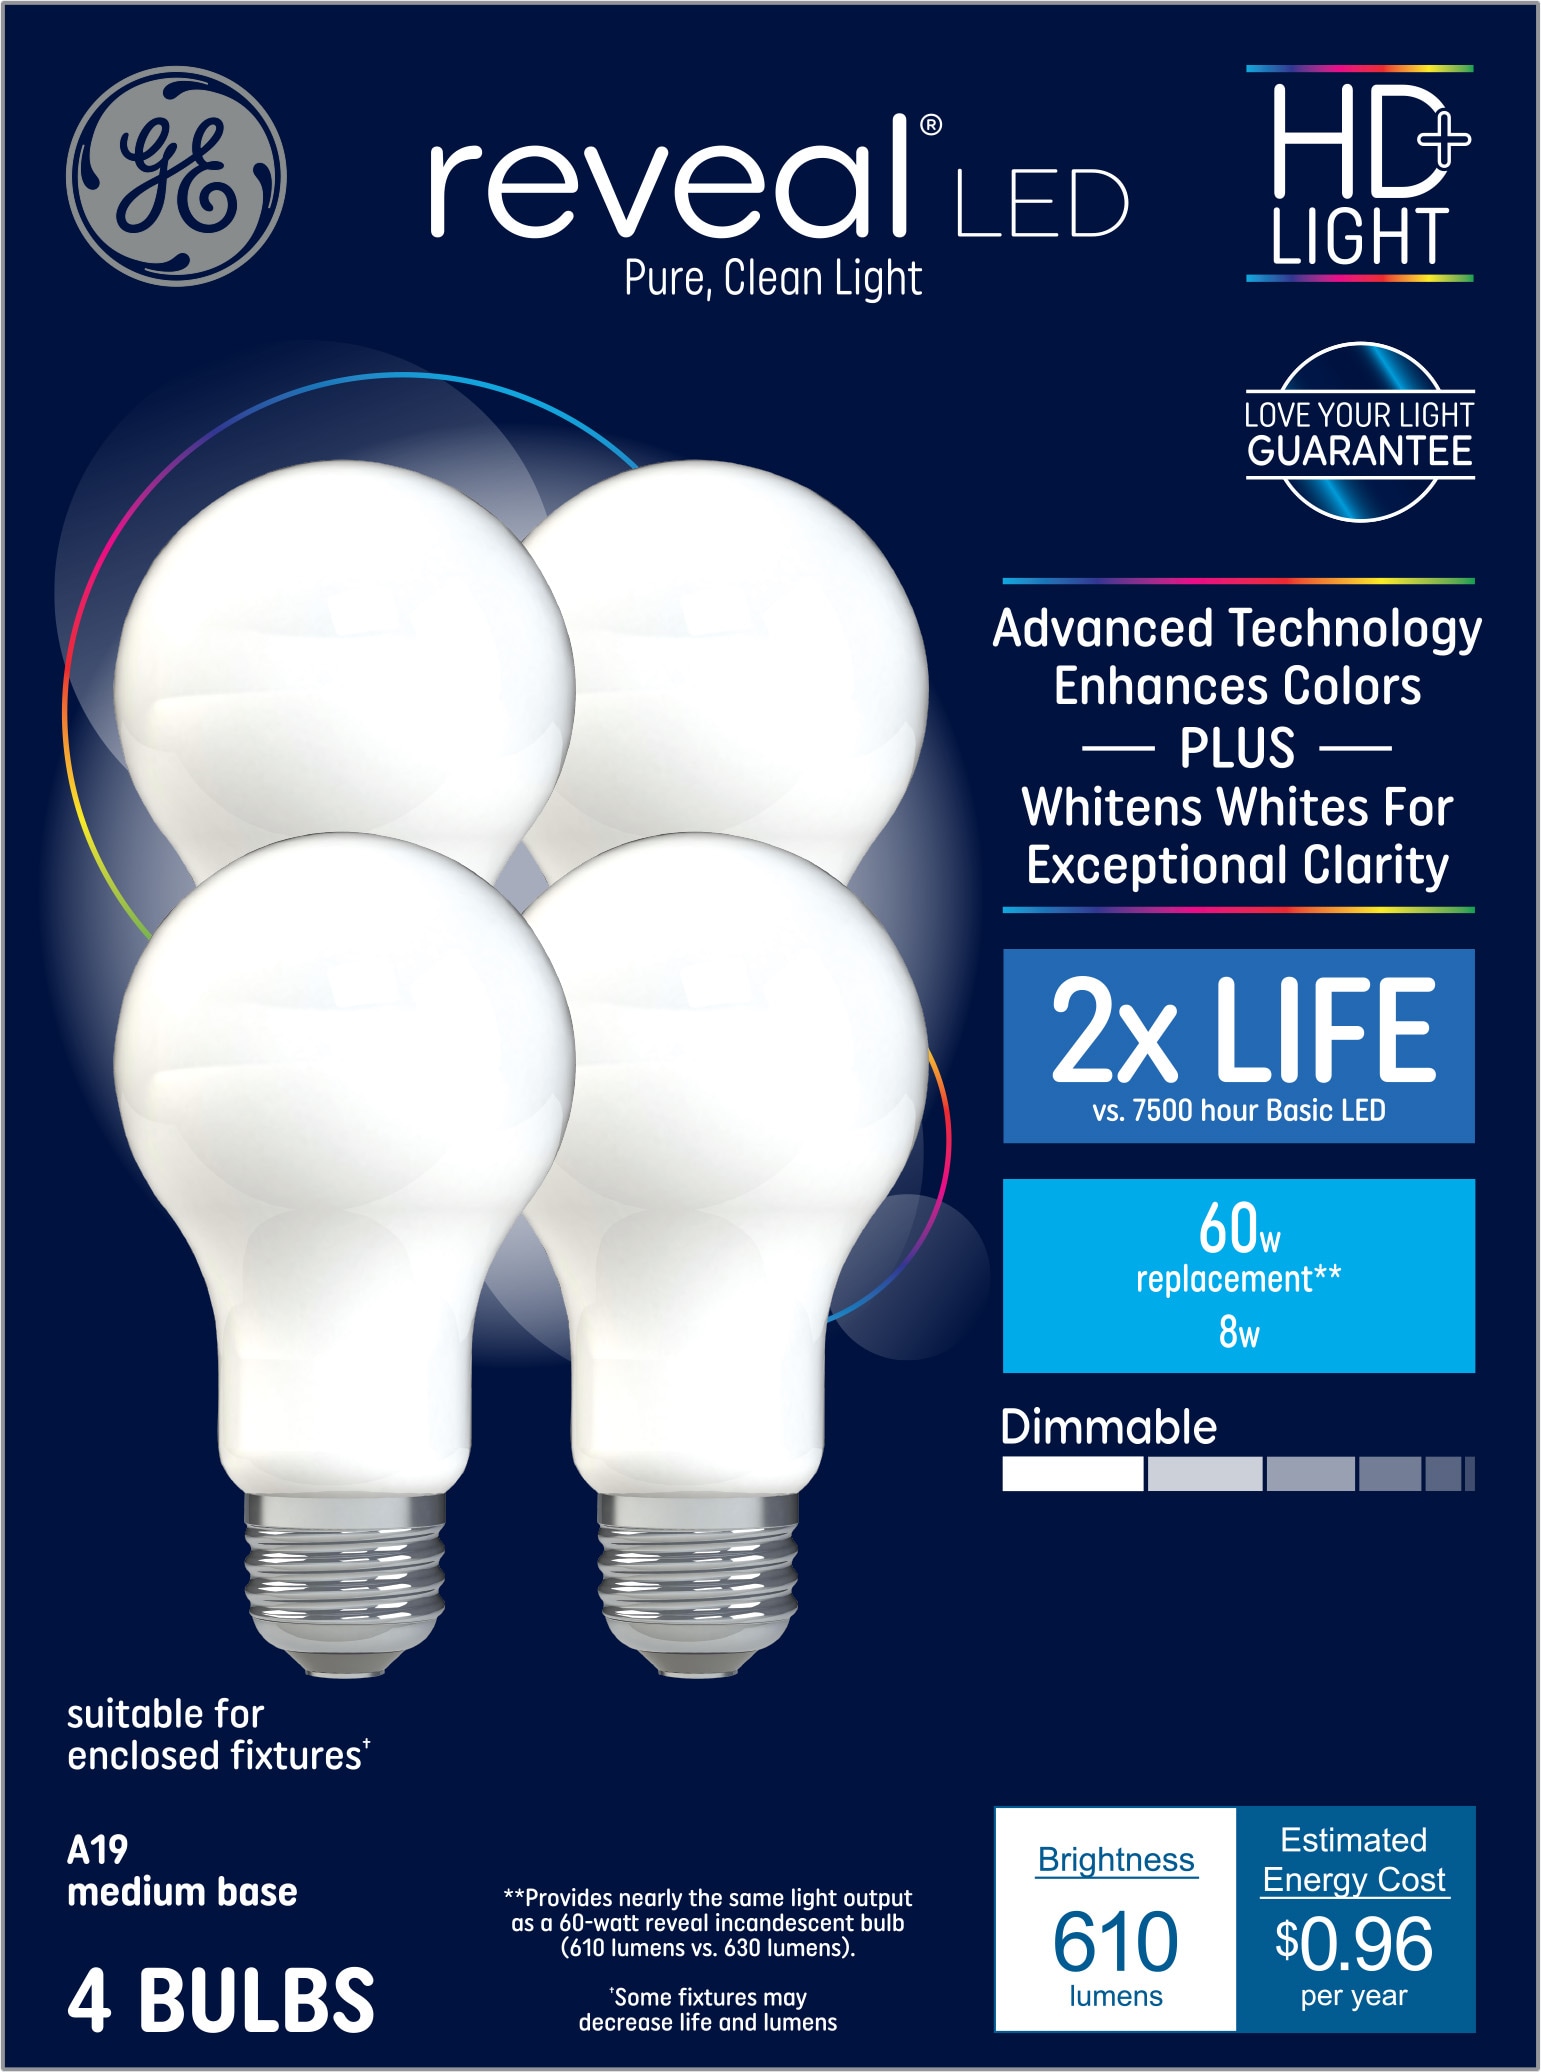 Philips Smart LED 60-Watt A19 General Purpose Light Bulb, Frosted Color &  Tunable White, Dimmable, E26 Medium Base (1-Pack) 